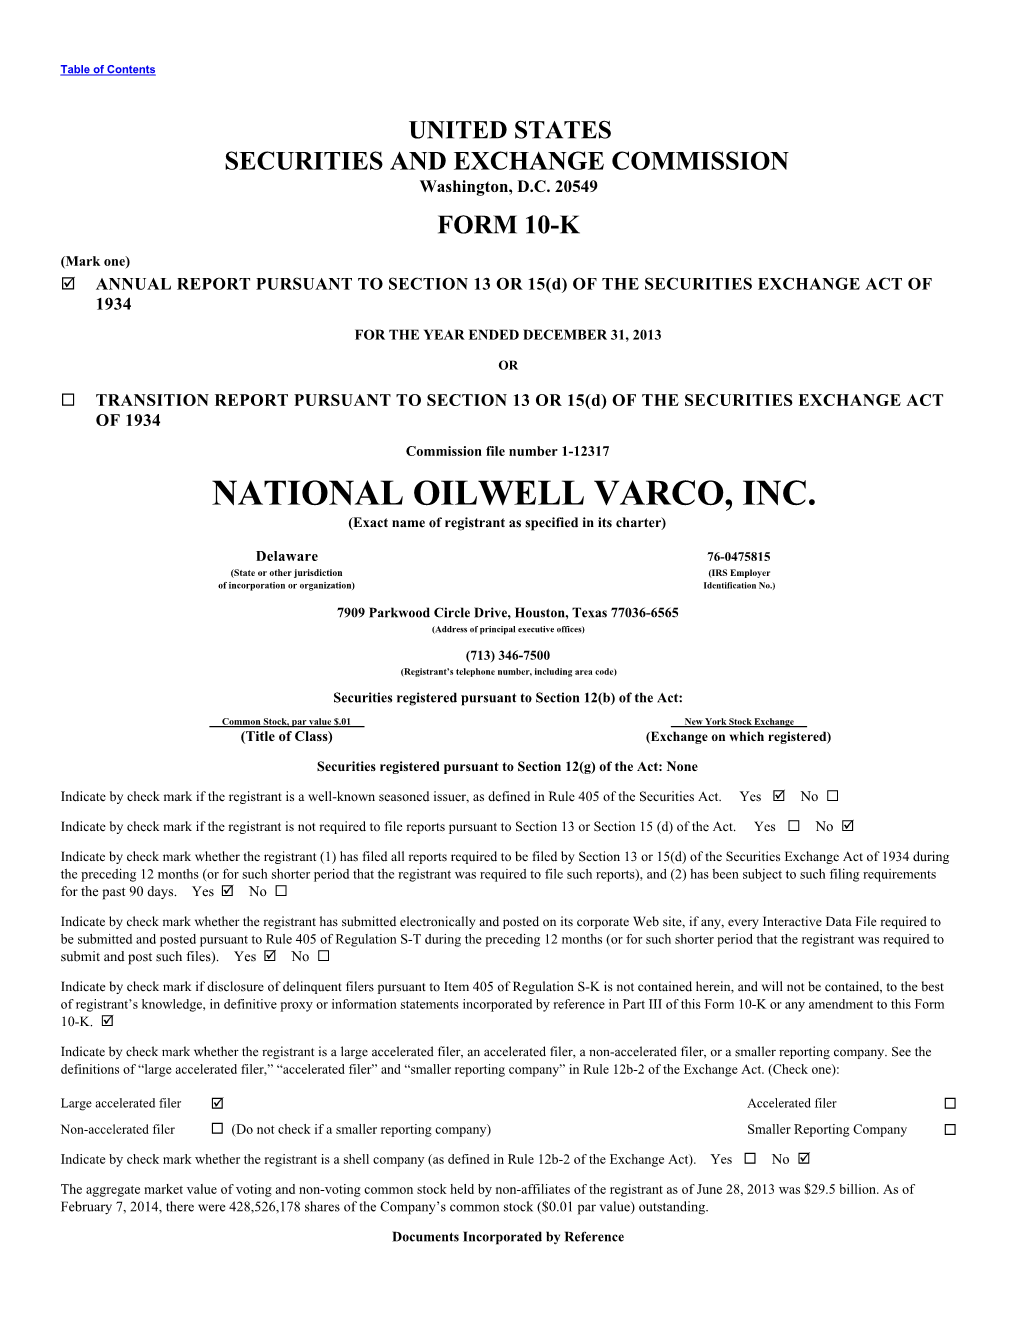 NATIONAL OILWELL VARCO, INC. (Exact Name of Registrant As Specified in Its Charter)